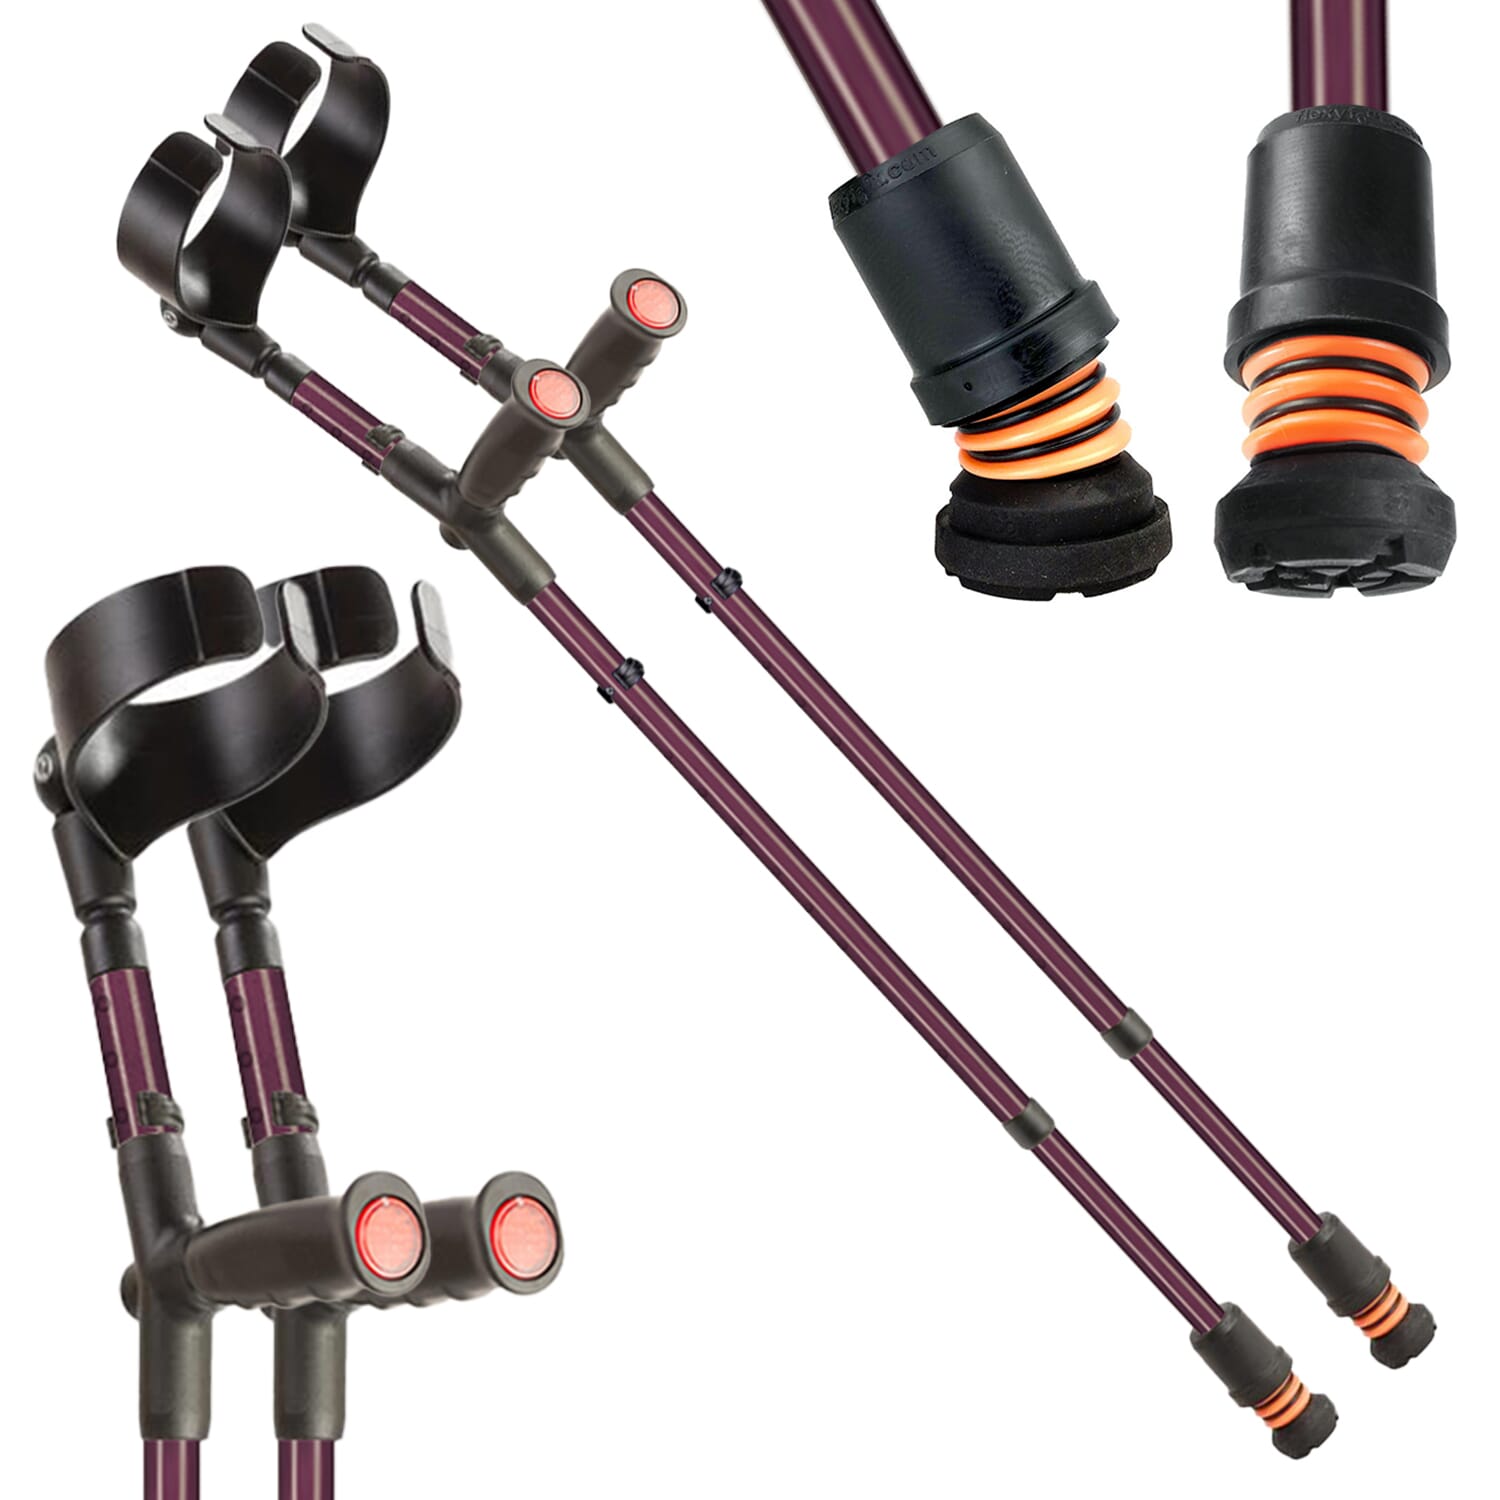 View Flexyfoot Soft Grip Double Adjustable Crutches Blackberry Pair information